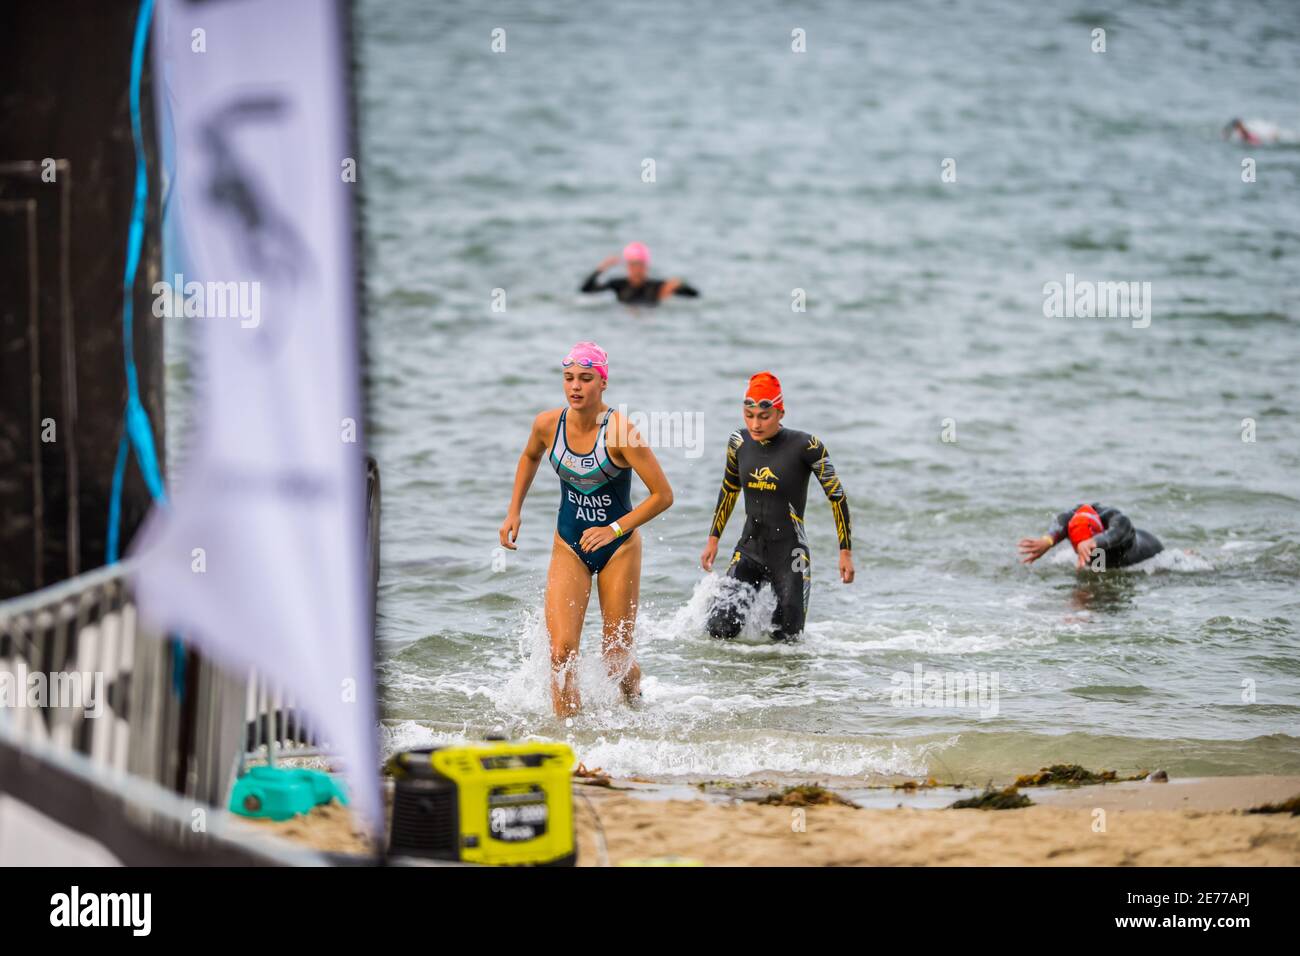 Melbourne, Australia. 17th Jan, 2021. Female triathletes, Ola Evans and Karolina Czajkowska seen exiting the water after a swim race during the 2XU Triathlon Series 2021, Race 1 at St Kilda Beach. Credit: SOPA Images Limited/Alamy Live News Stock Photo